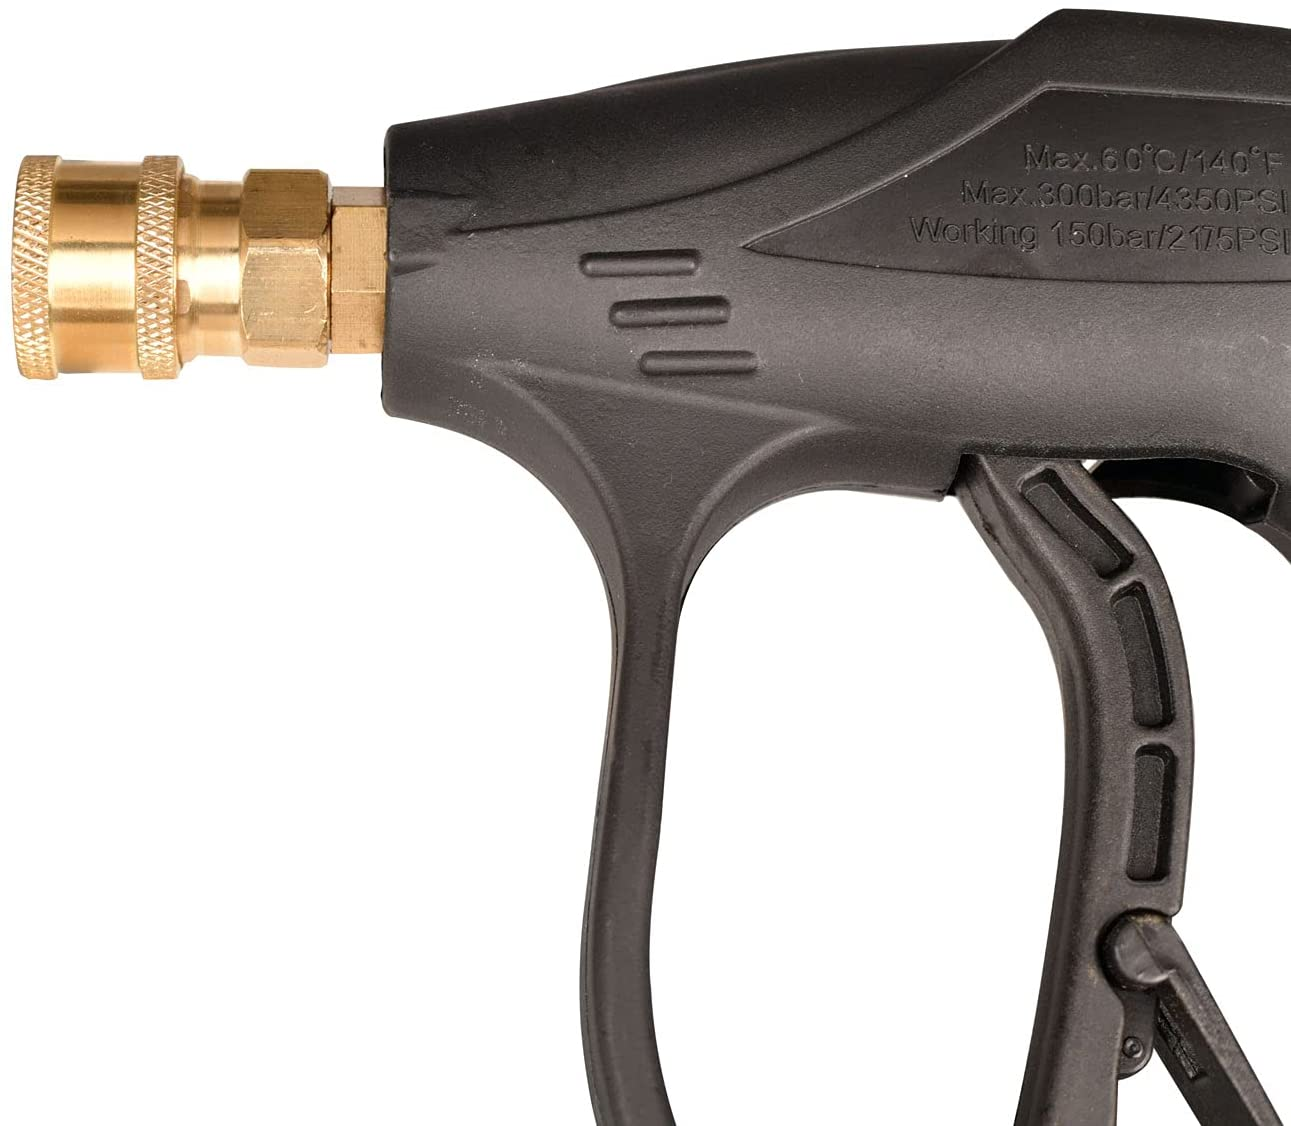 High Pressure Washer Gun Short Washer Gun 3000 PSI Max with 5 Color Quick Connect Nozzles, 3.0 Tips